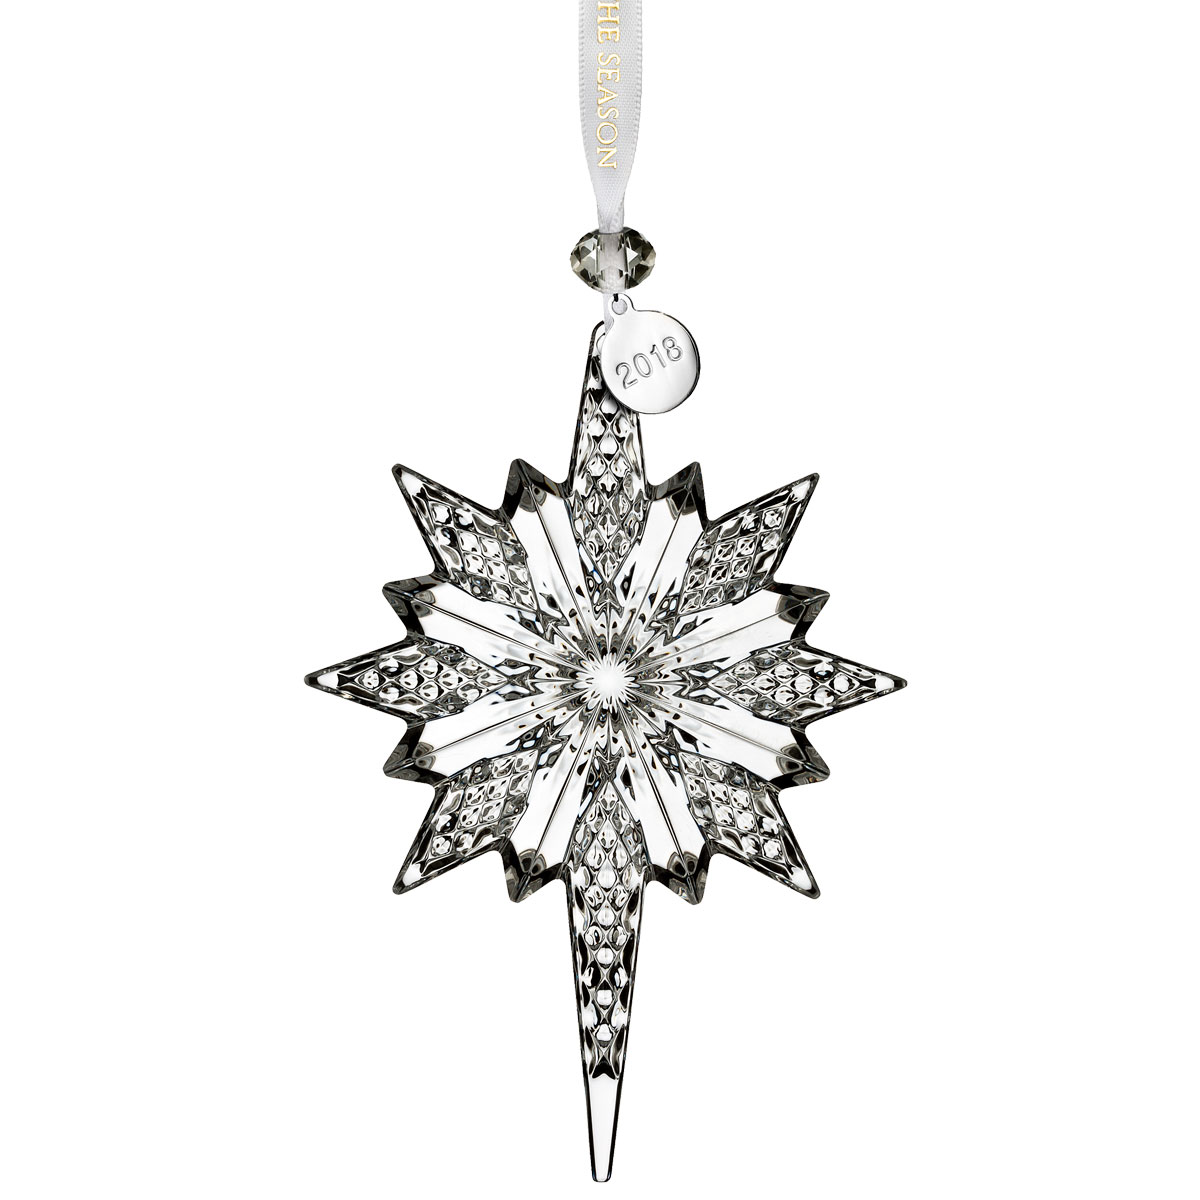 Waterford Crystal Snowstar 2018 Ornament